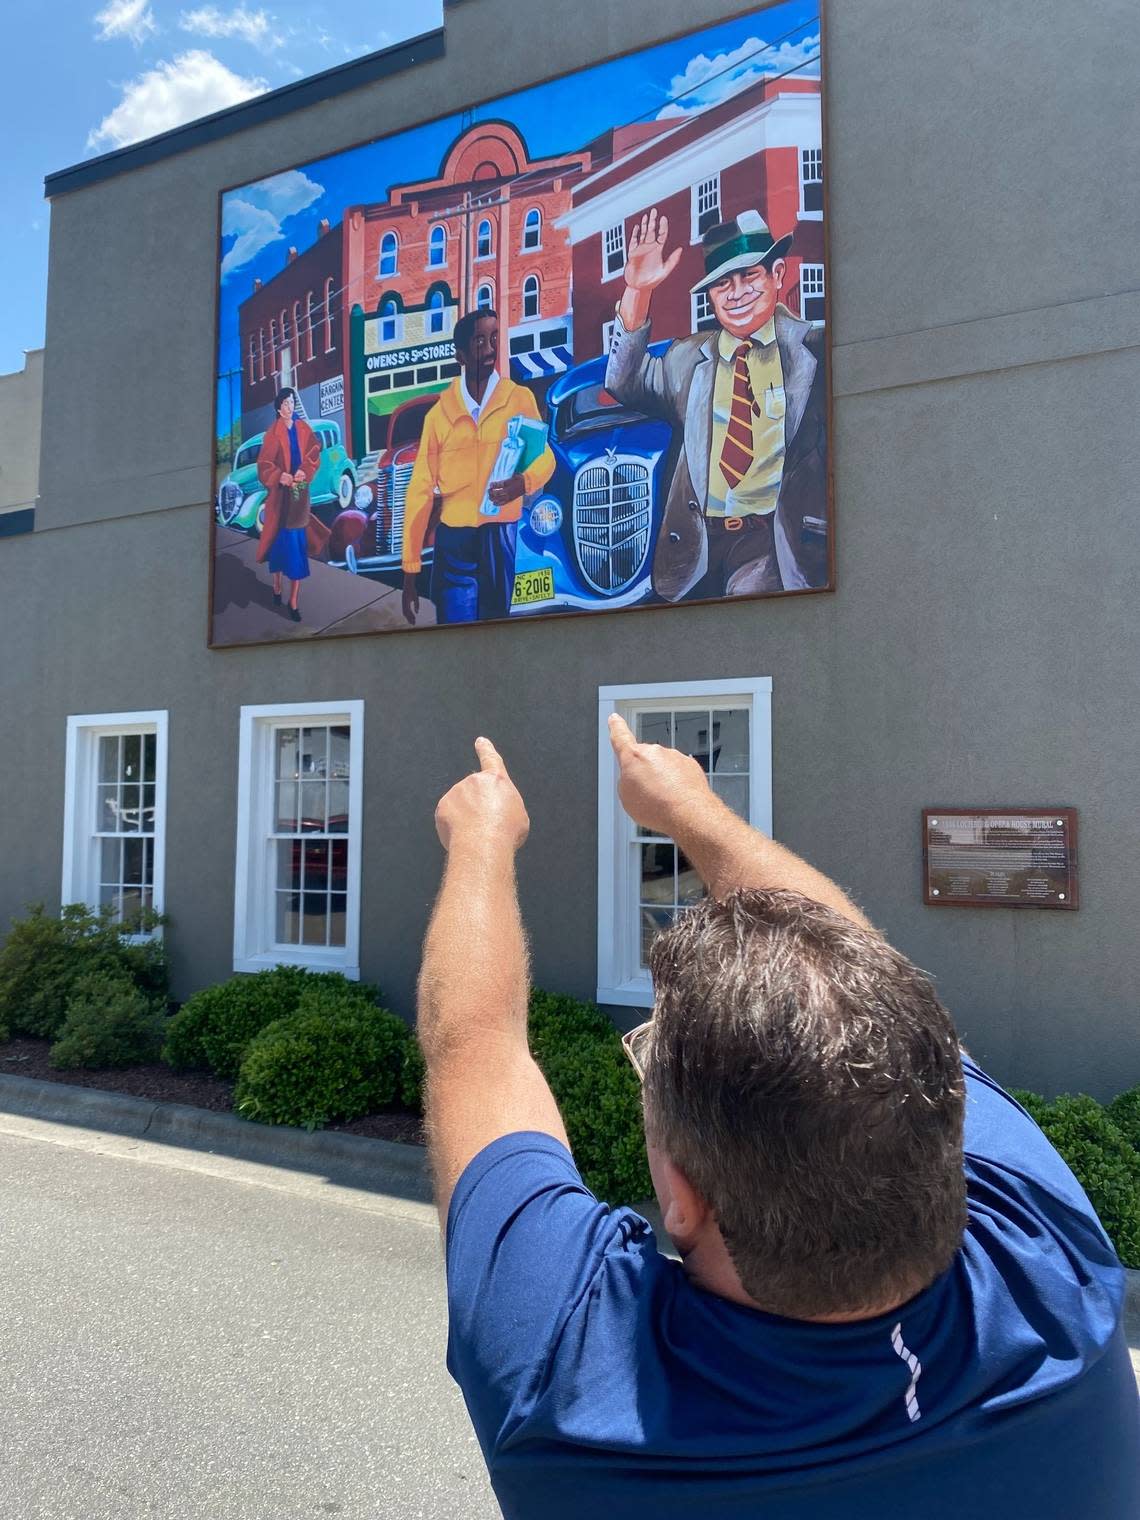 Will Hinton points out details of the mural he and a Louisburg college student painted based on a downtown scene in a silent movie from 1936.